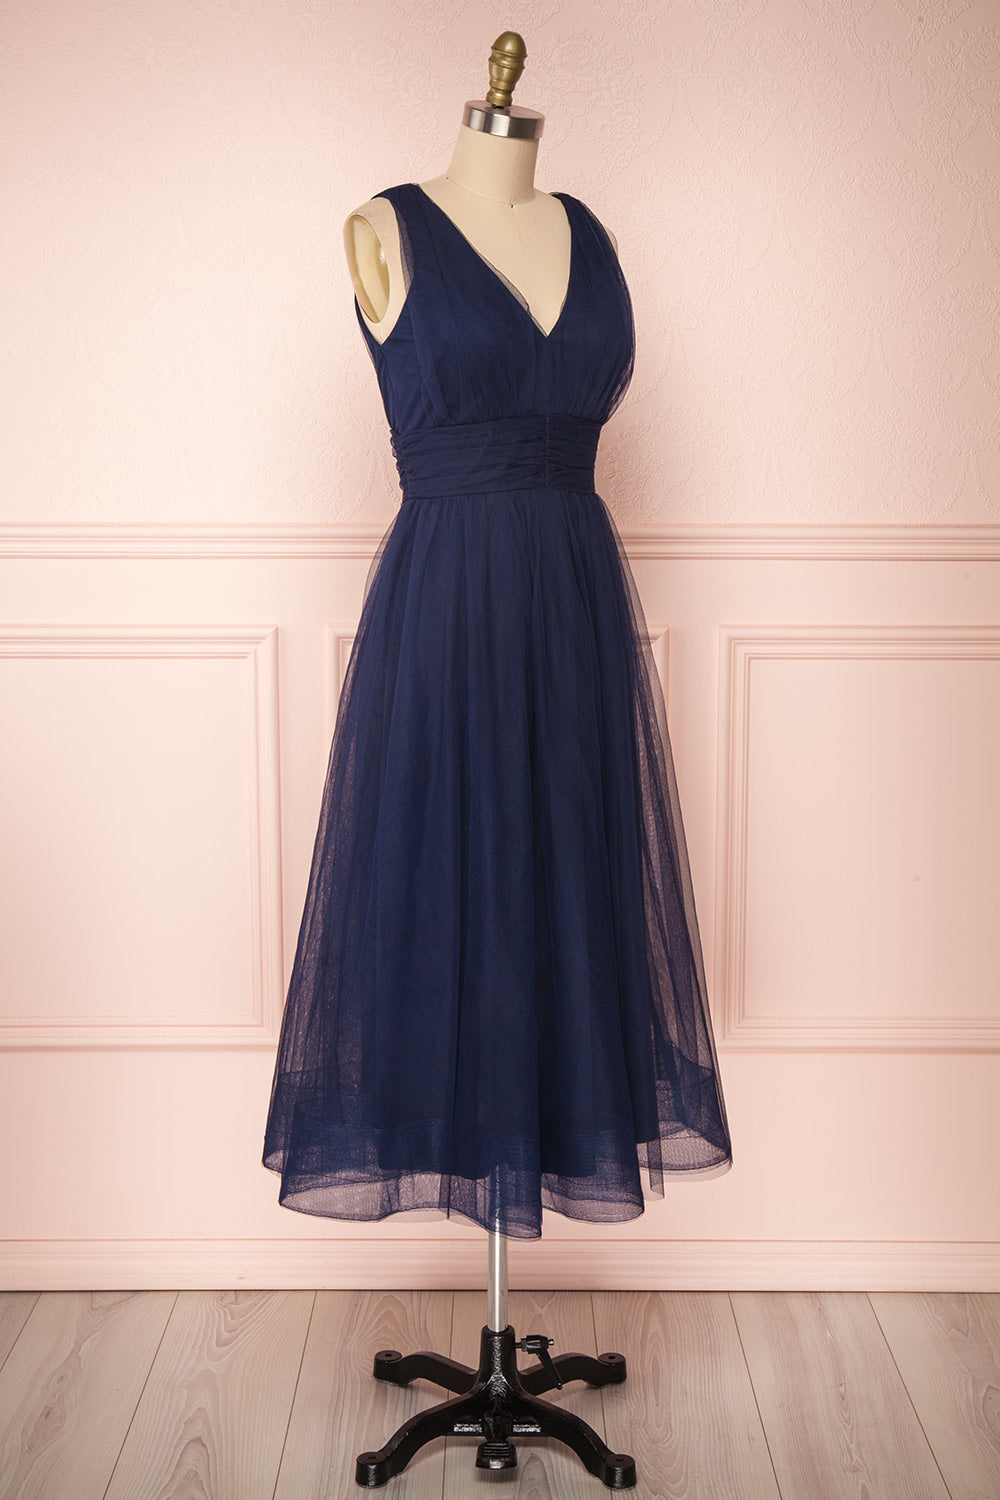 Galynne Marine Party Dress | Robe en Tulle side view | Boutique 1861